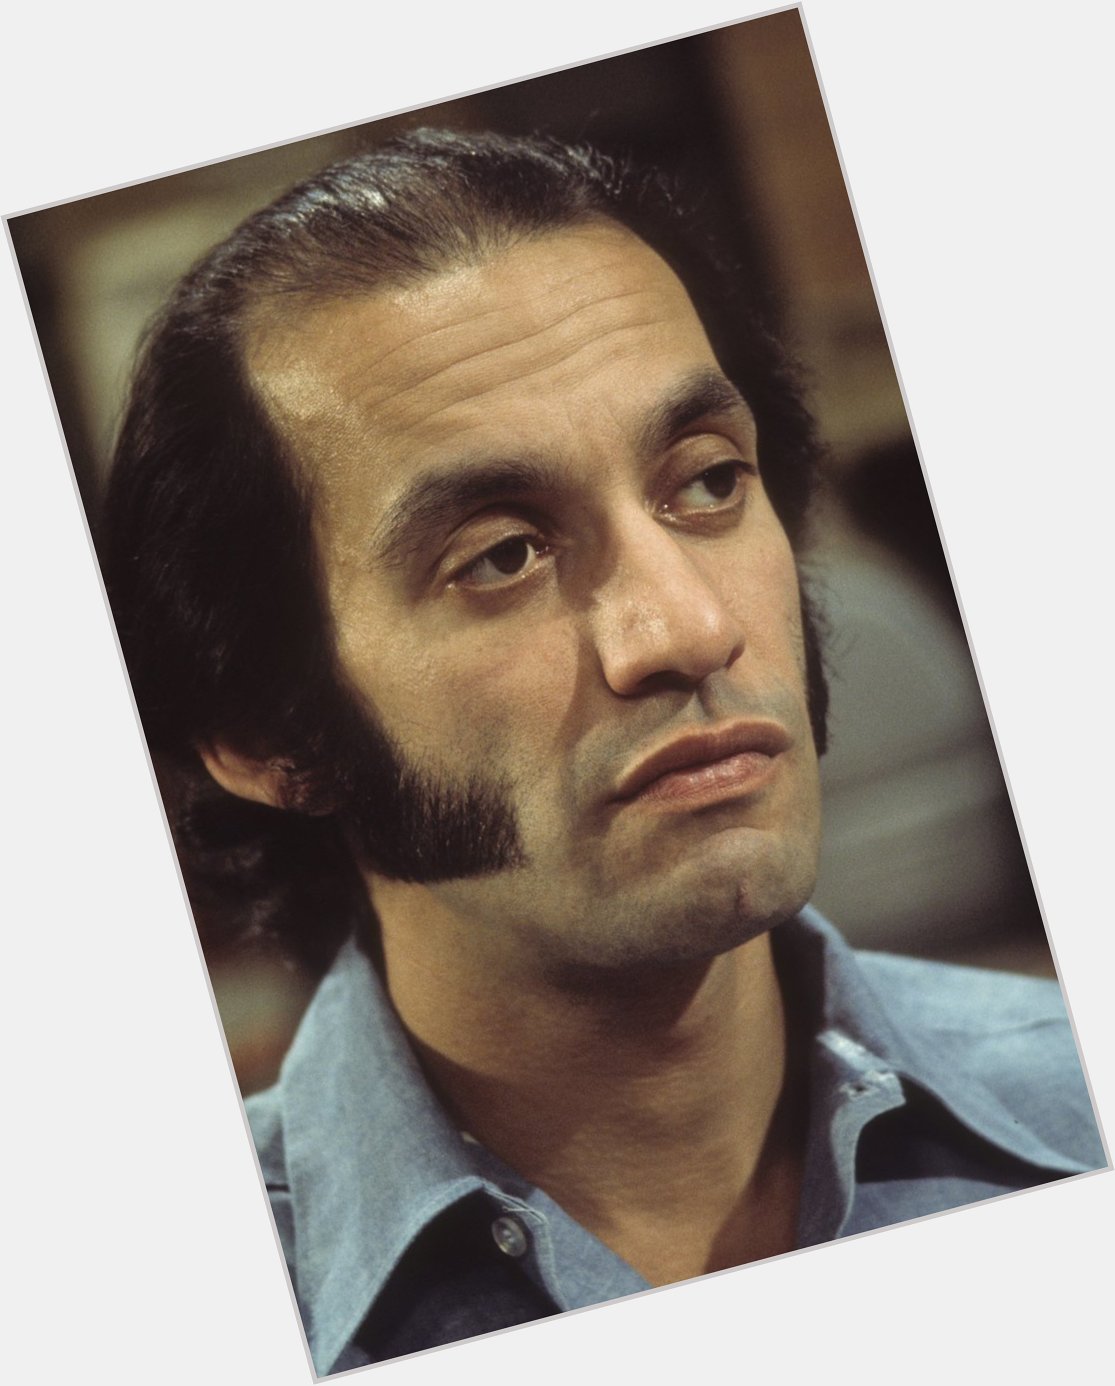 Happy 82nd birthday to Gregory Sierra! I remember him well from Barney Miller and Sanford and Son. 